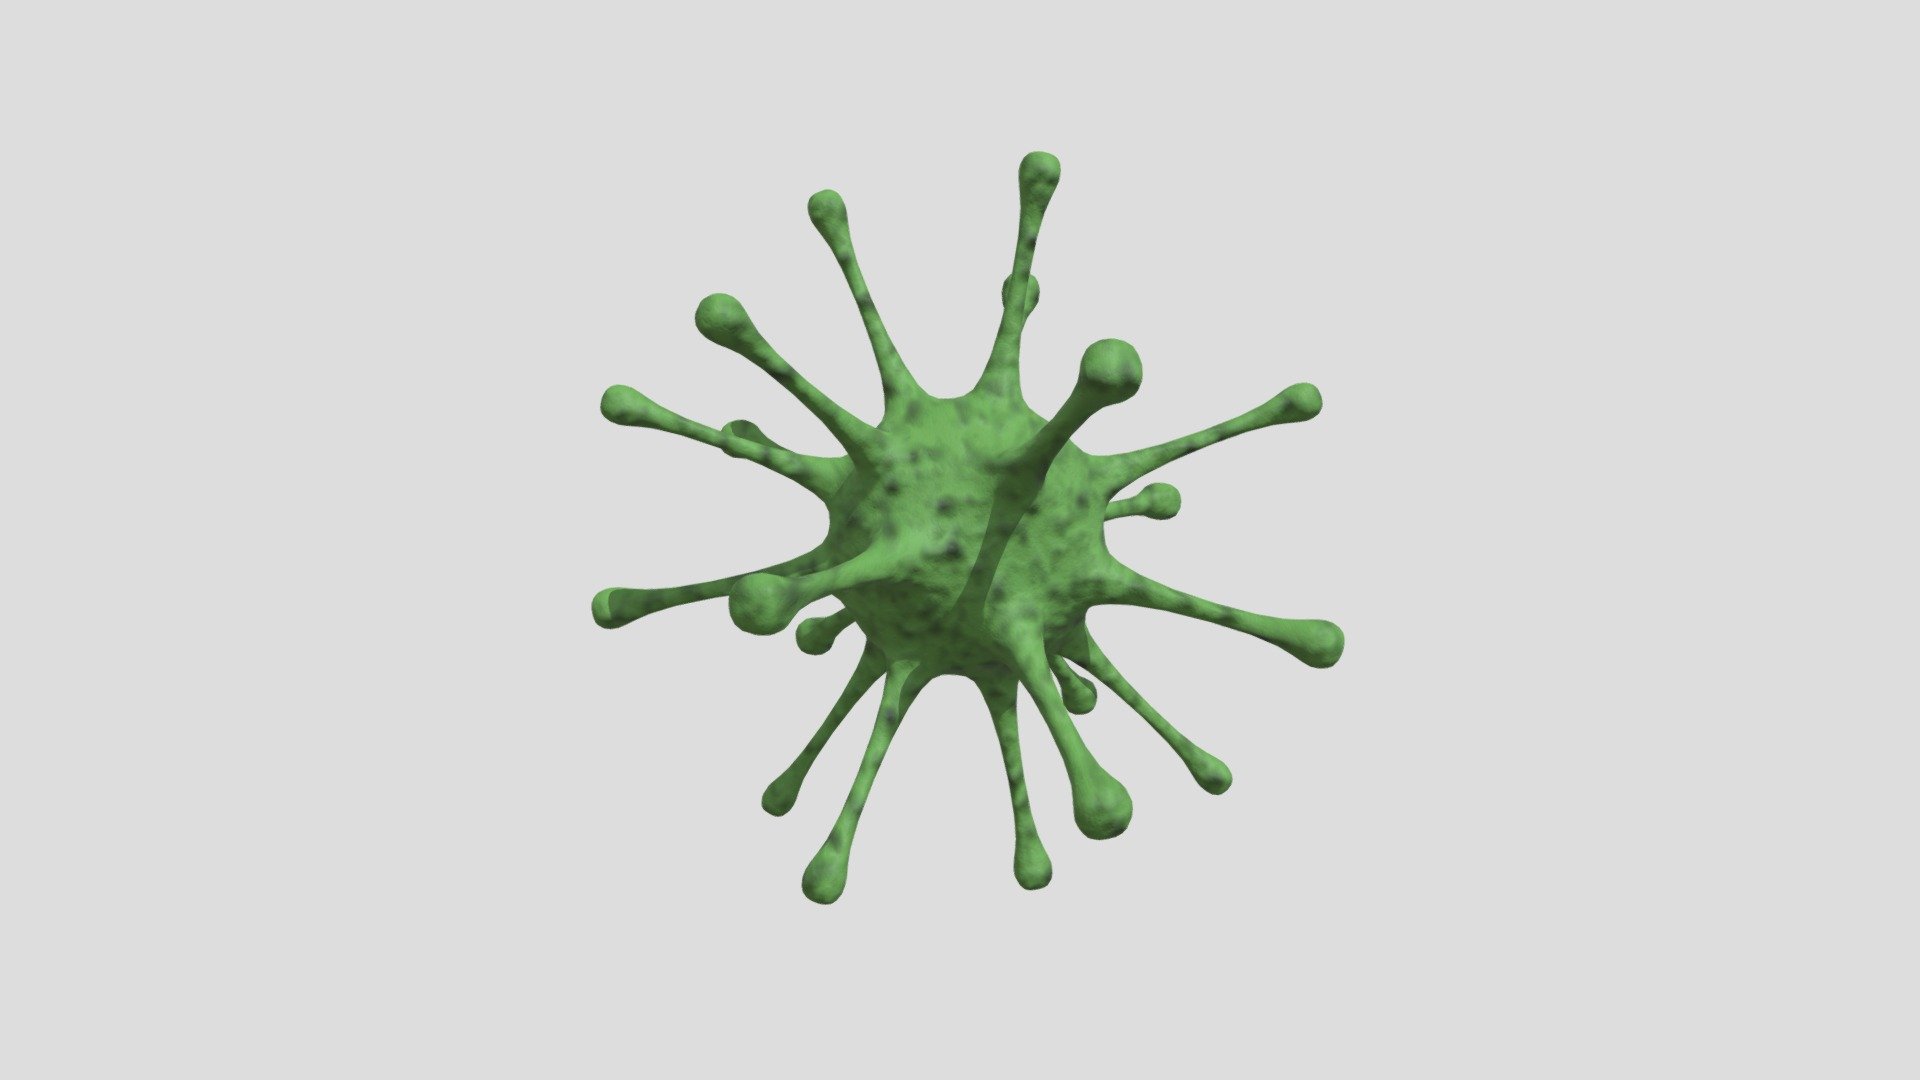 Textures: 2048 x 2048, Two colors on texture: Green and black colors.

Has Normal Map: 2048 x 2048.

Rigged.

Materials: 1 - Virus.

Smooth shaded.

Non-Mirrored.

Subdivision Level: 1

Origin located on middle-center.

Polygons: 10560

Vertices: 5282

Formats: Fbx, Obj, Stl, Dae.

I hope you enjoy the model! - Virus - Buy Royalty Free 3D model by ED+ (@EDplus) 3d model